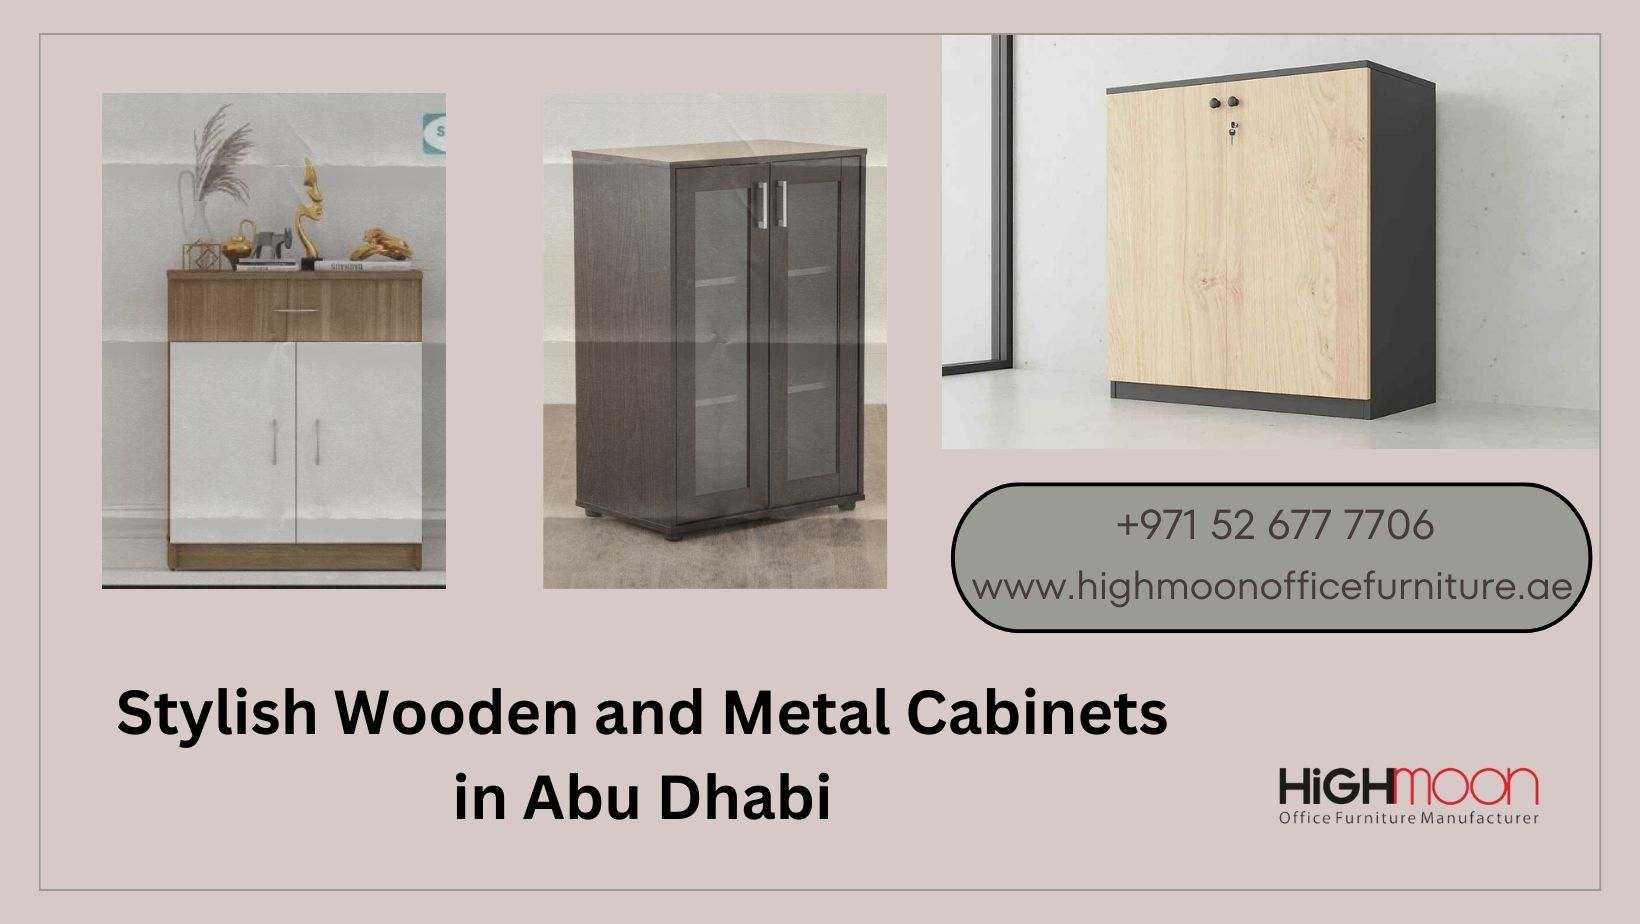 Cabinet for Sale in Abu Dhabi – Stylish Wooden and Metal Cabinets